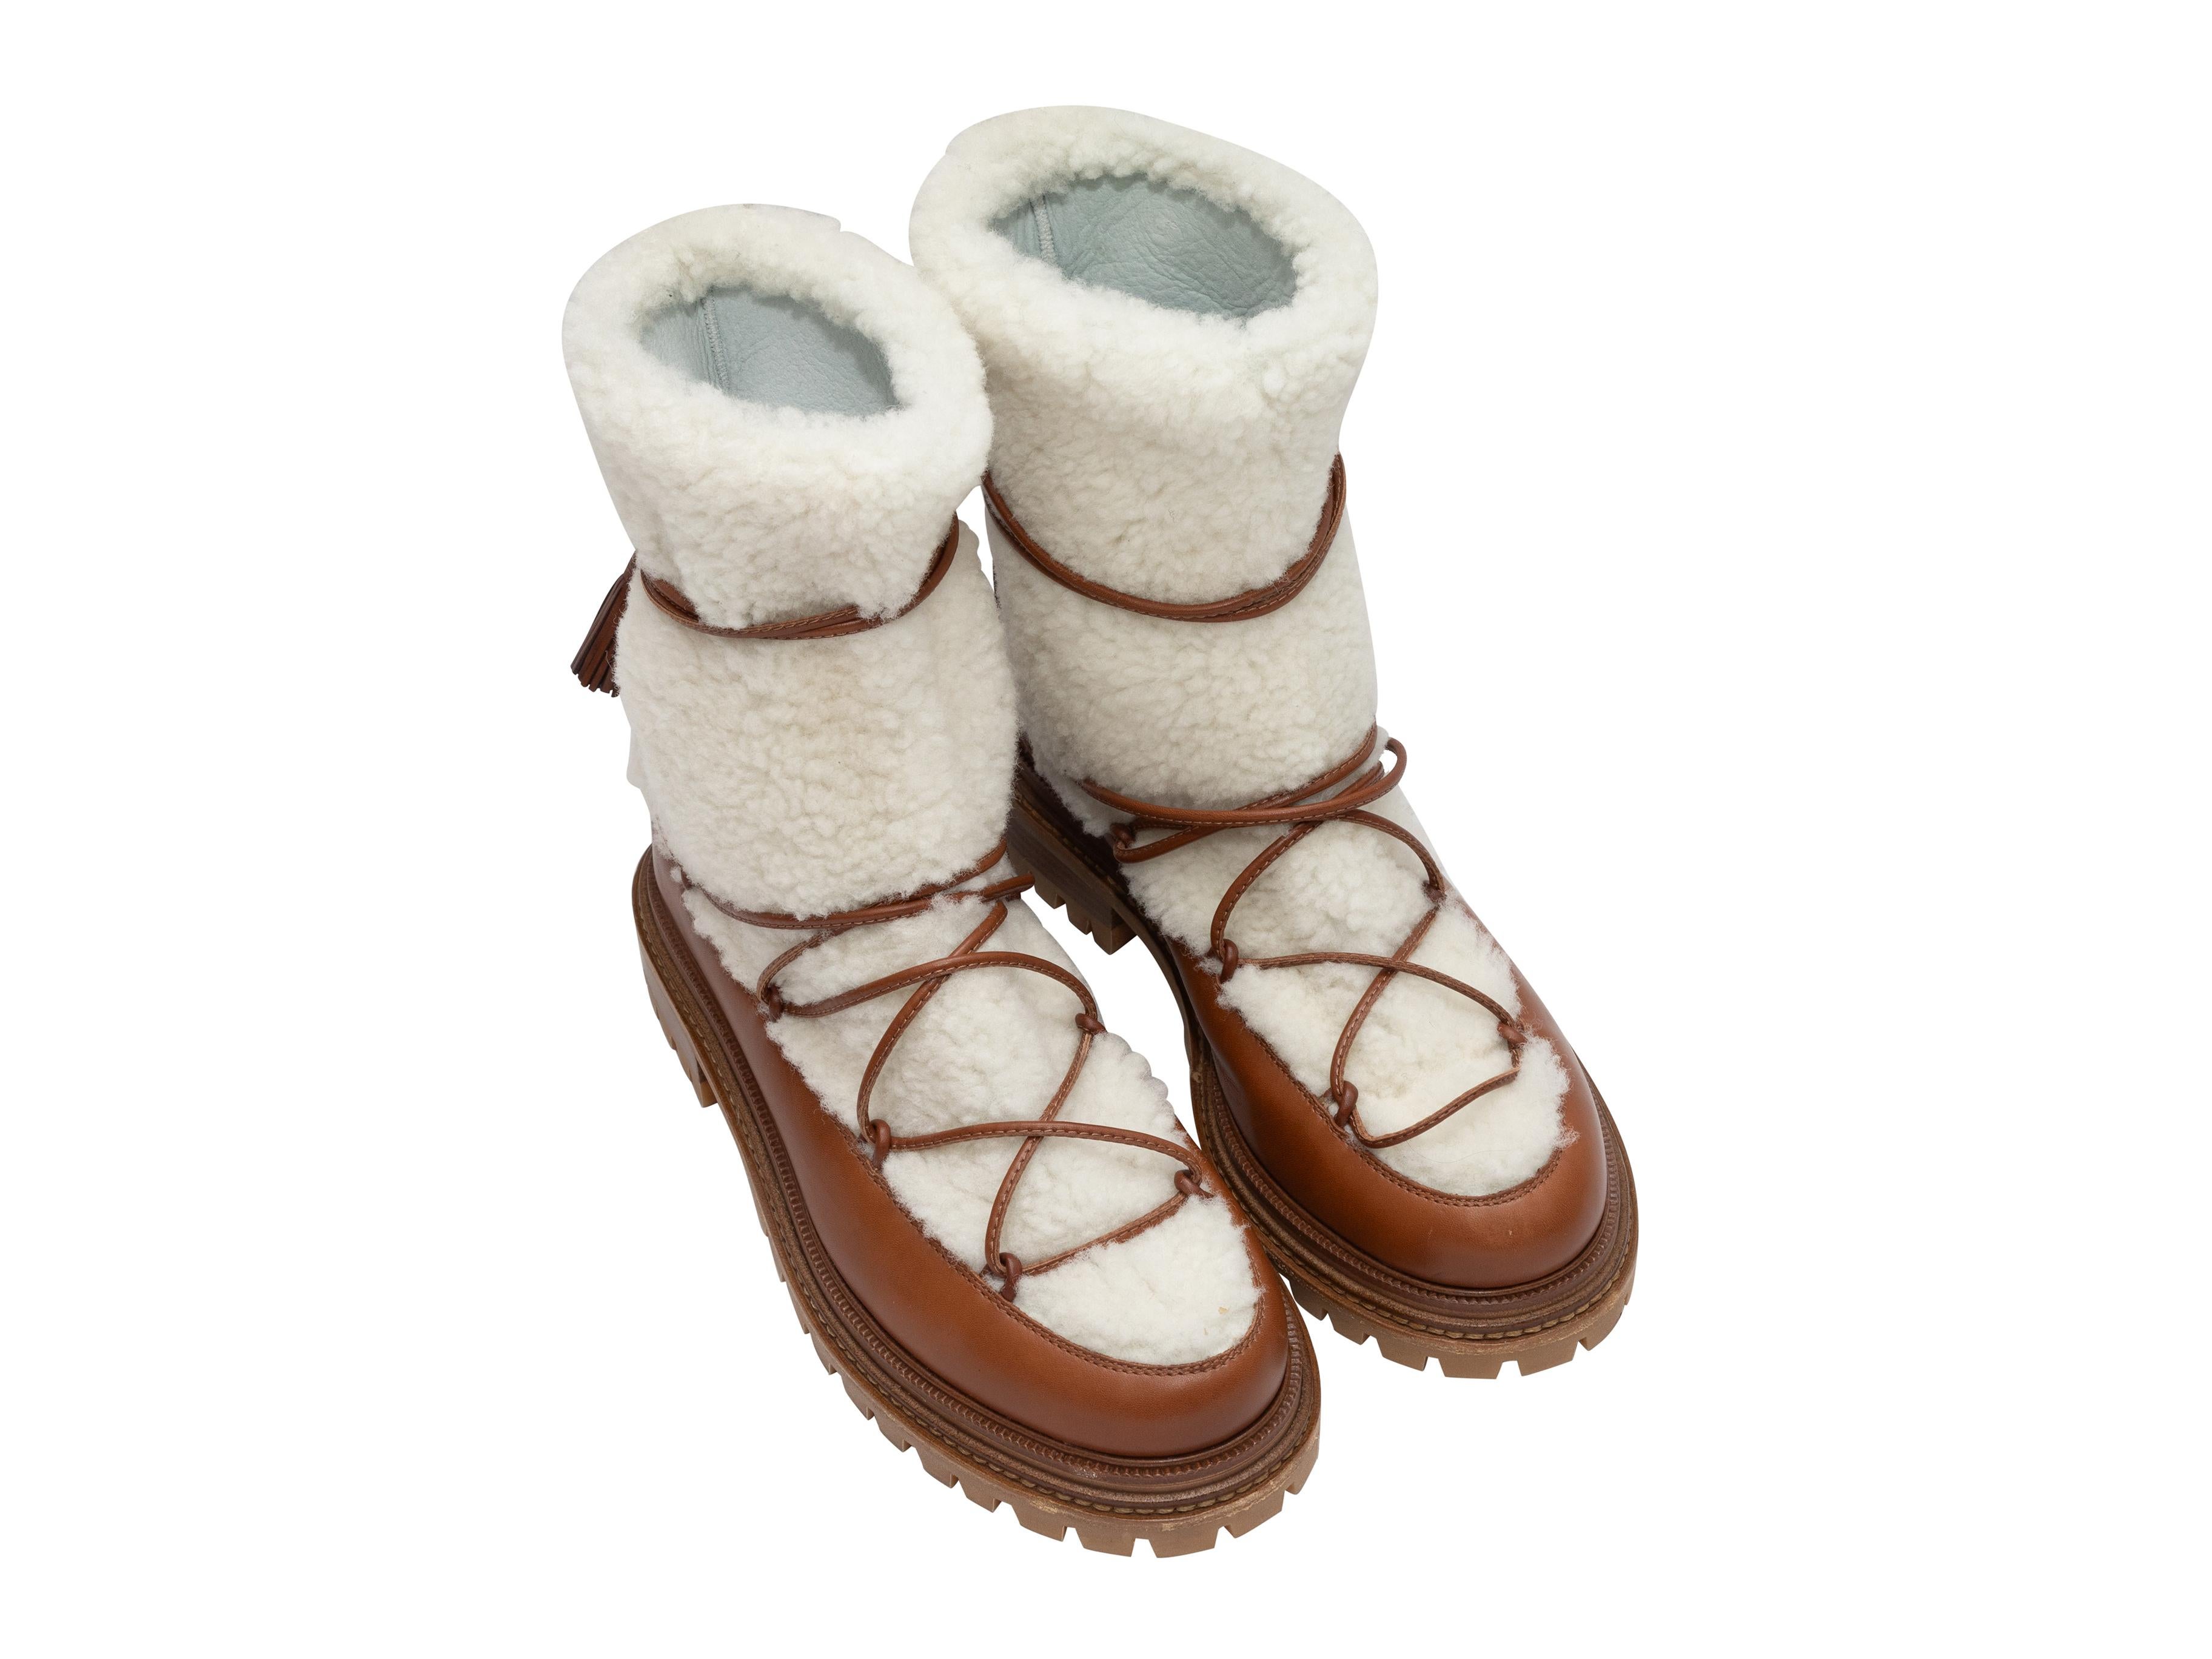 White shearling and brown leather snow boots by Aquazzura. Lug soles. Lace-up closures at tops. 1.5